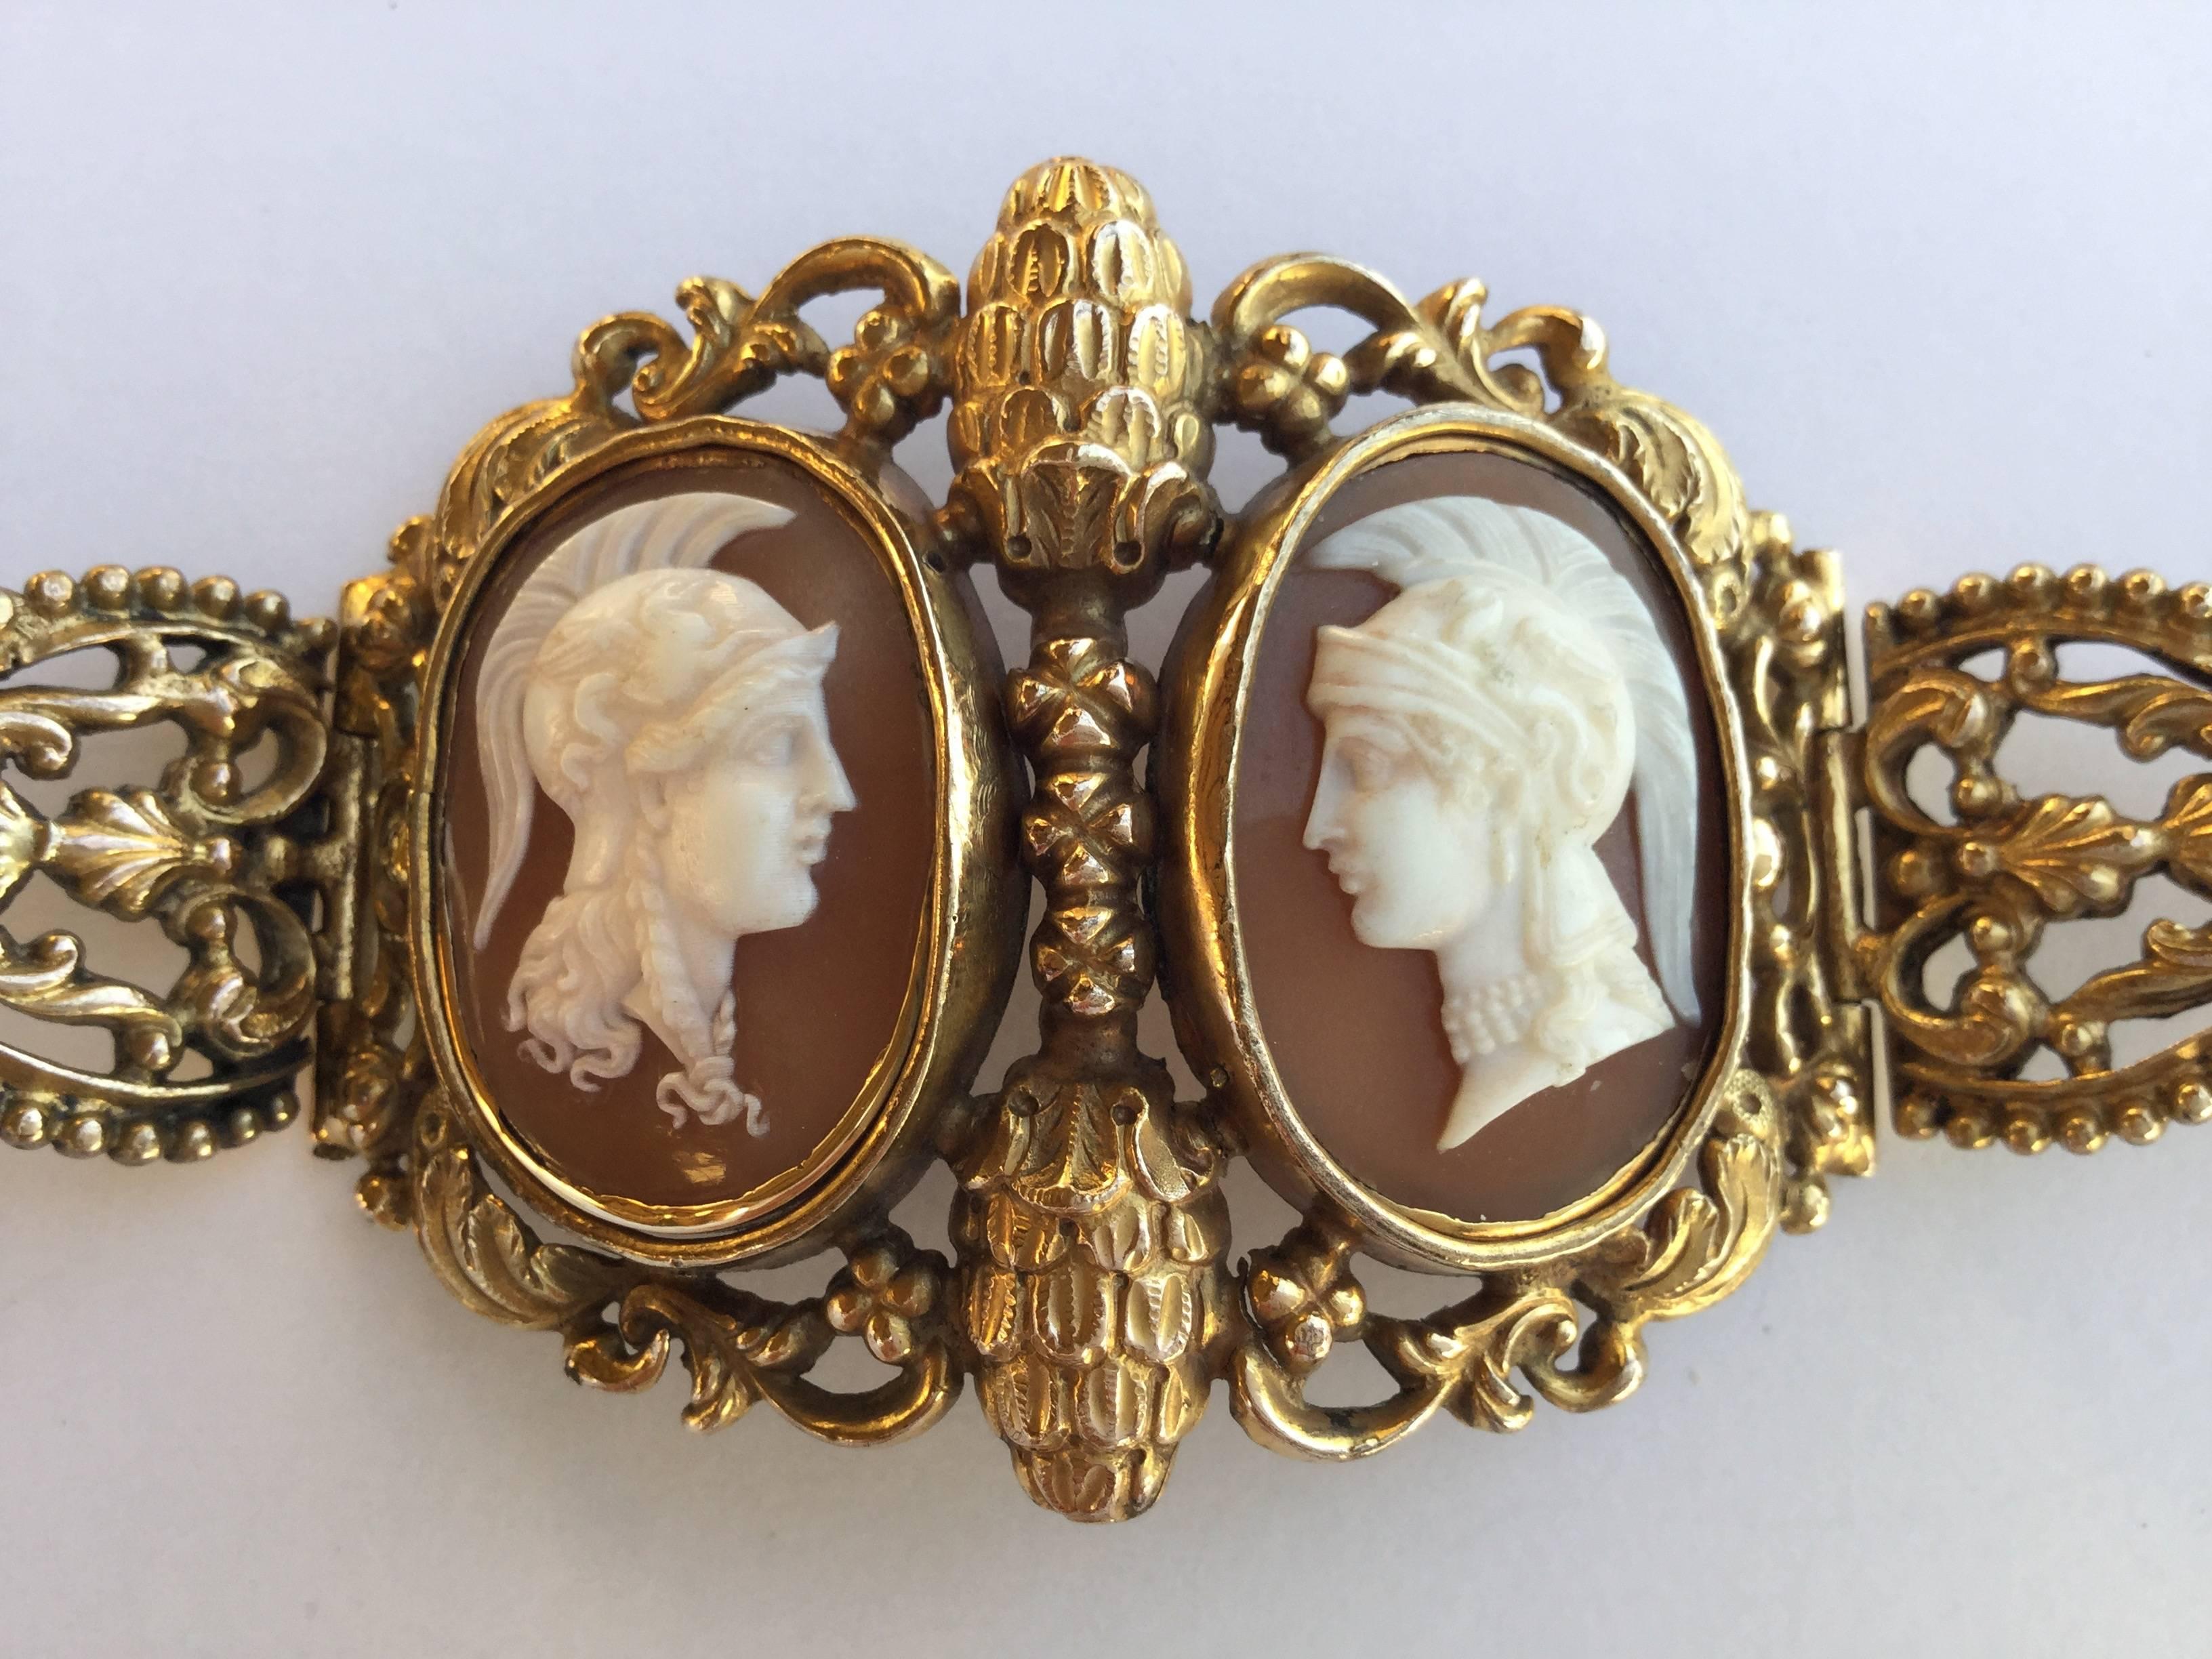 Amazing Double Cameo Style Victorian Pinchbeck Bracelet. English C.1880's. 2